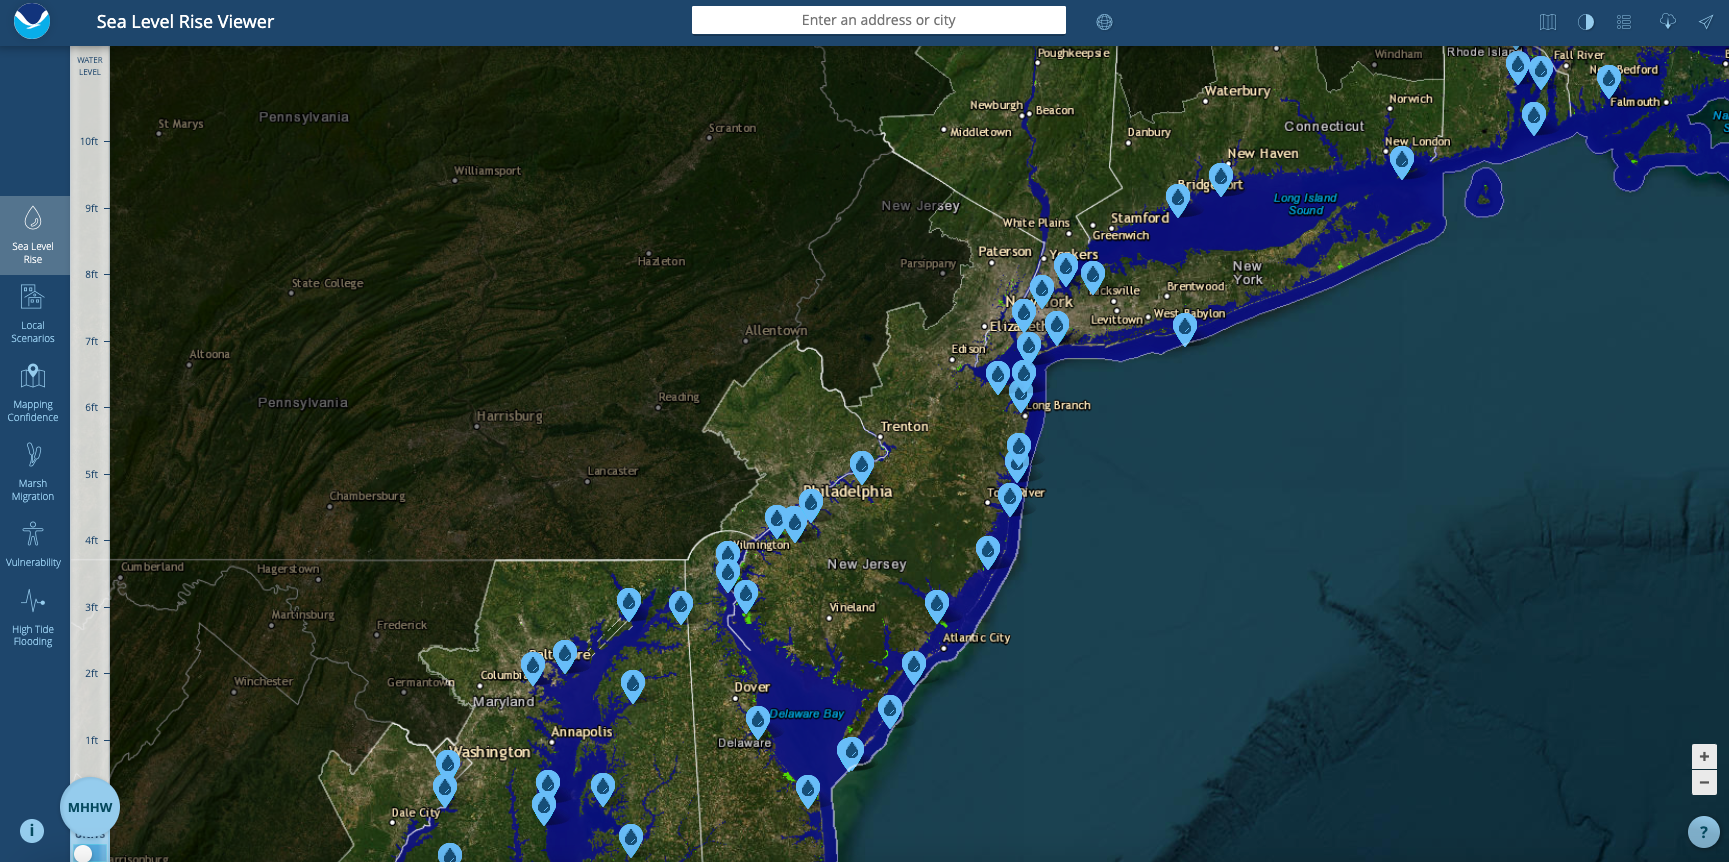 Which New Jersey towns will sink under water from sea level rise? Find out on this map